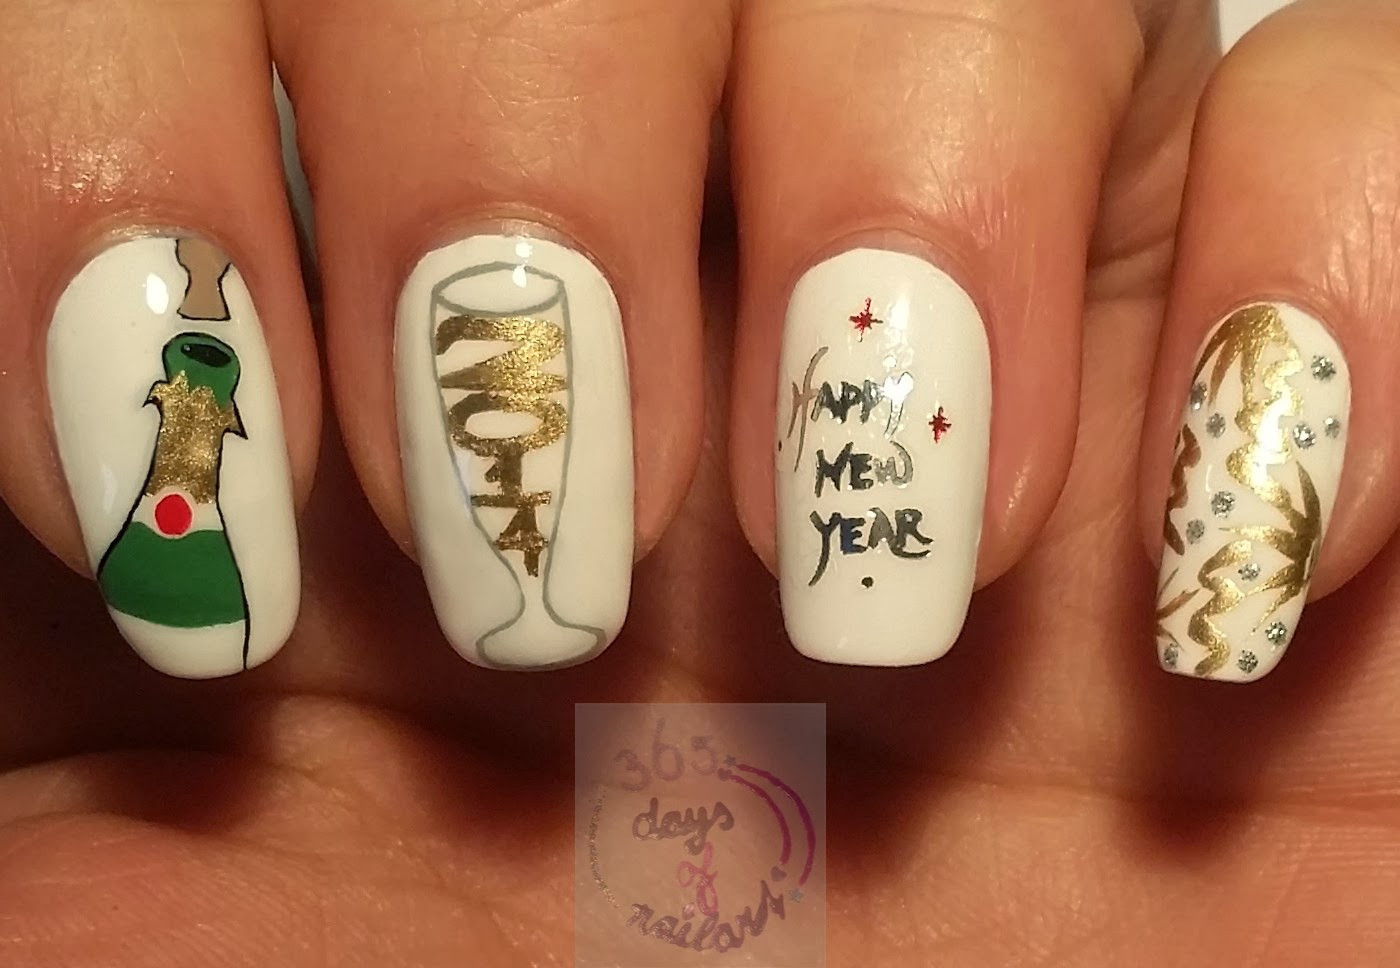 Champagne Nail Designs
 365 days of nail art Day 361 New Year nails champagne